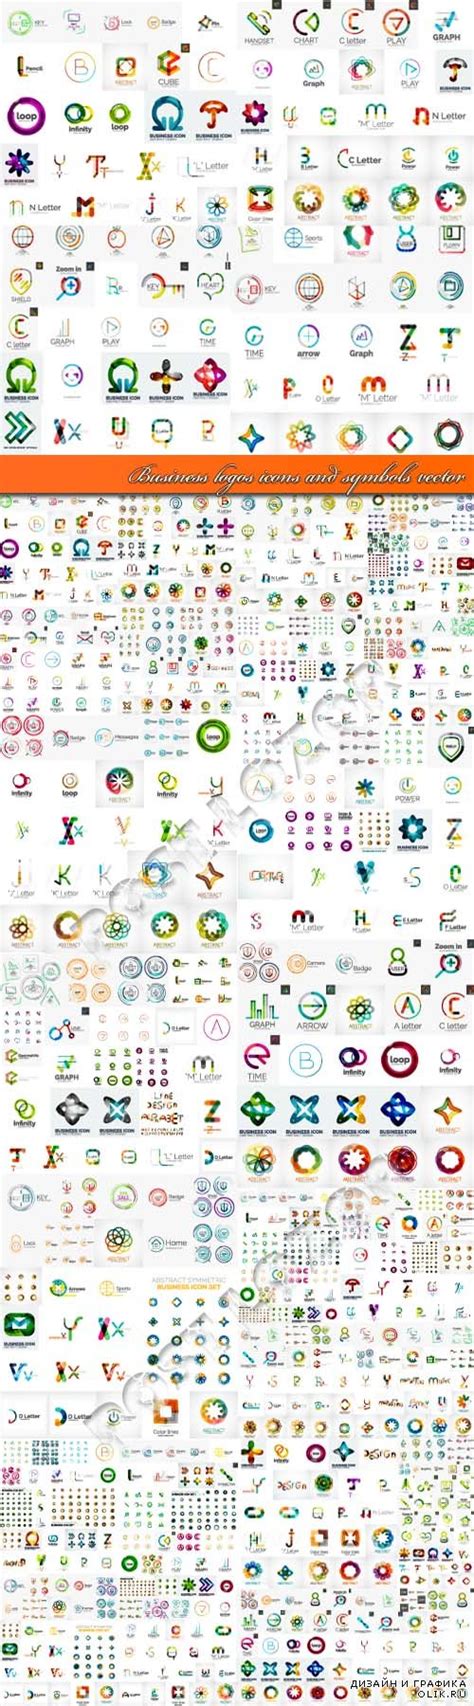 Business Logos Icons And Symbols Vector